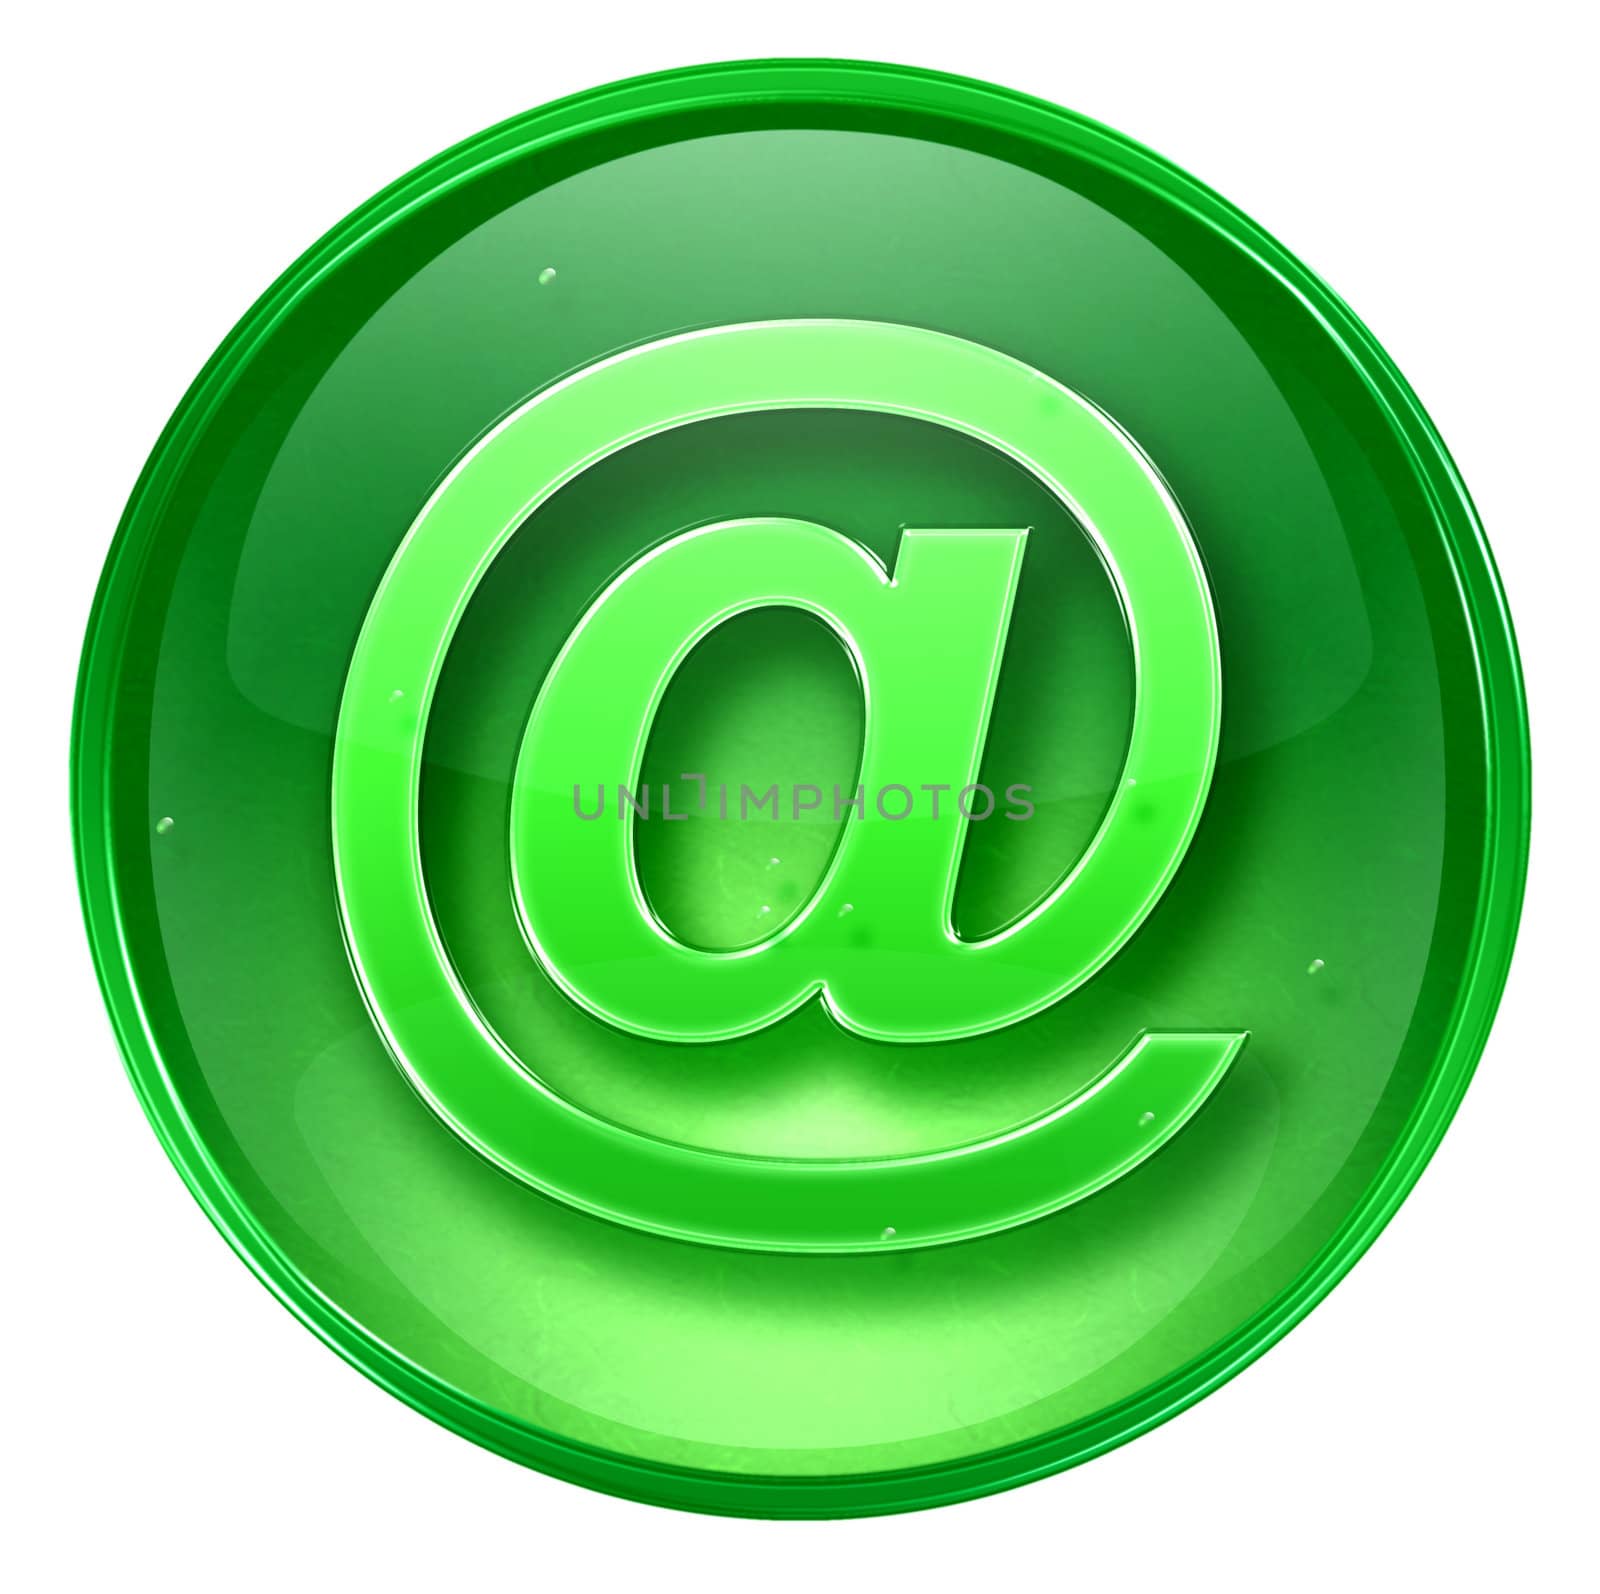 mail icon green, isolated on white background. 